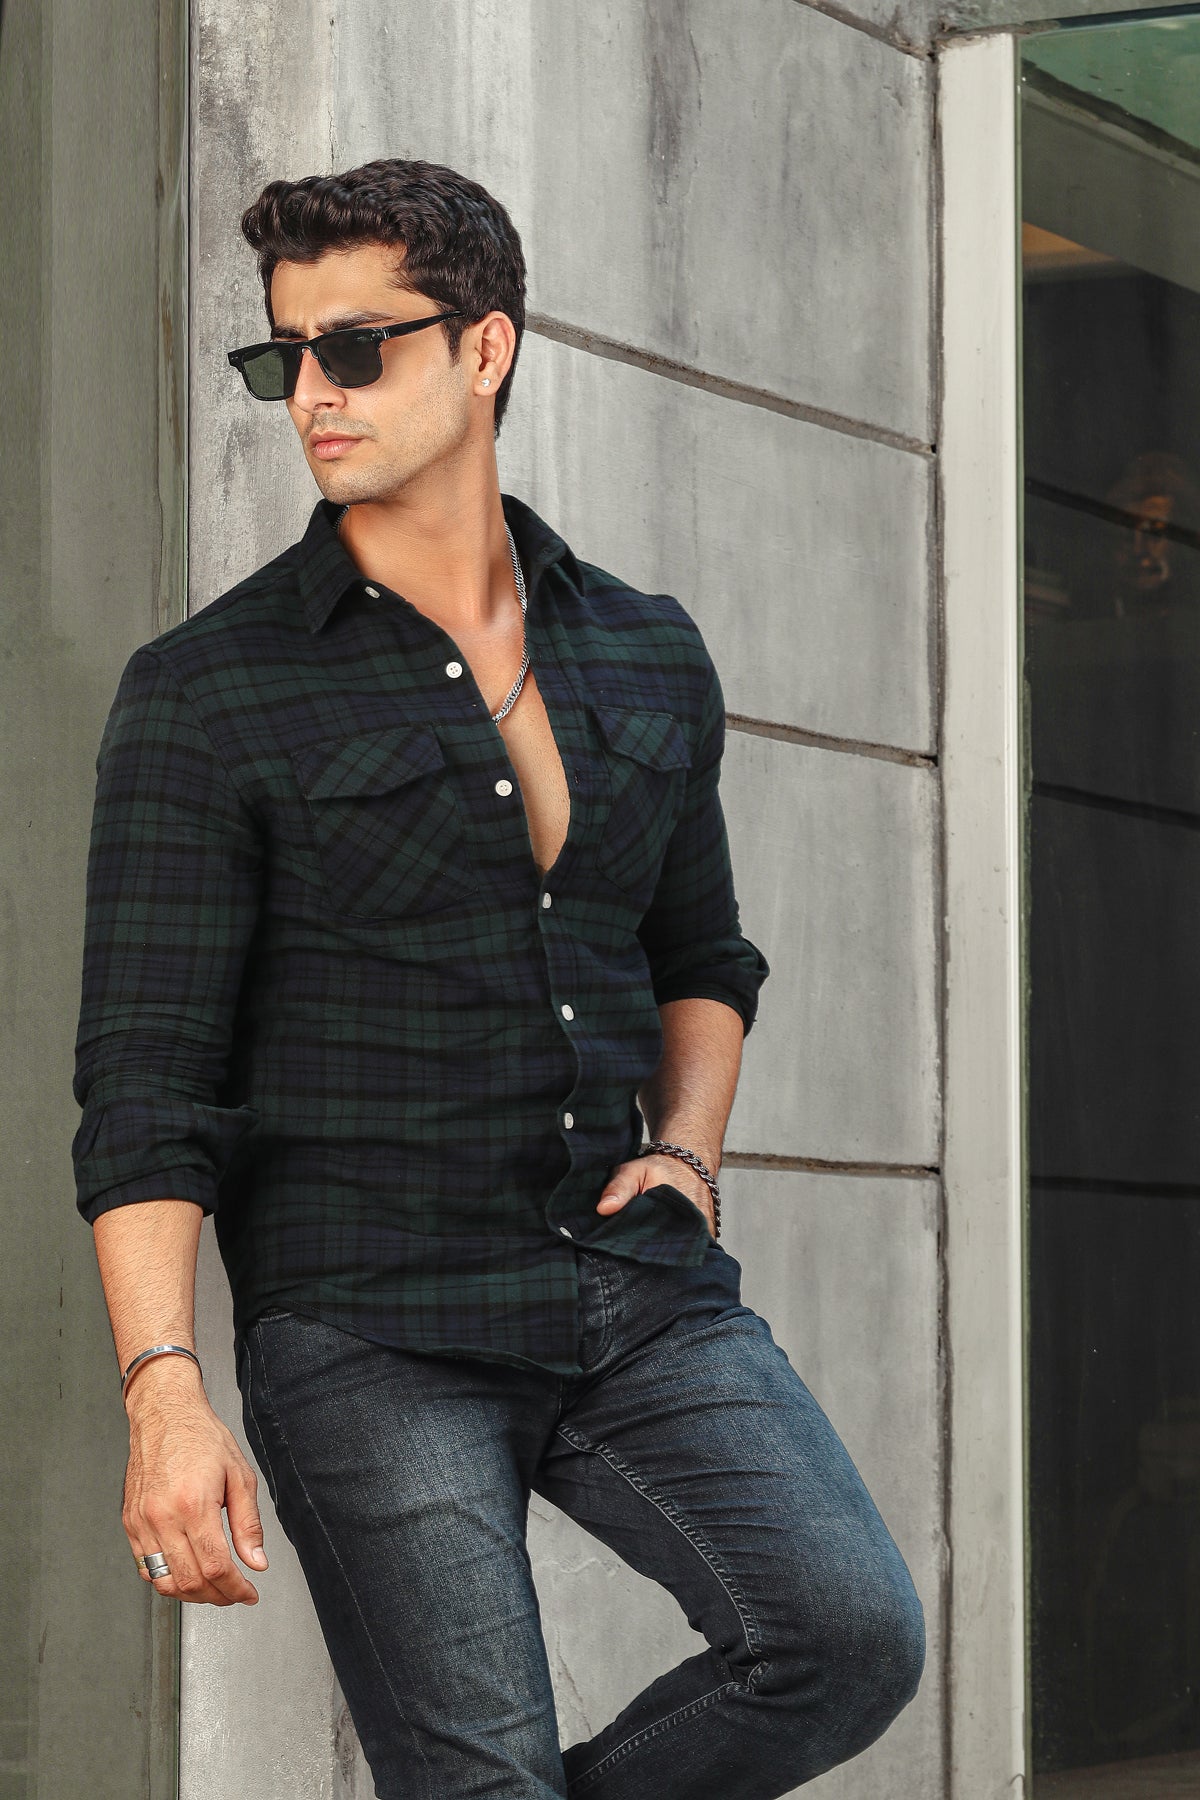 Flannel in navy and green